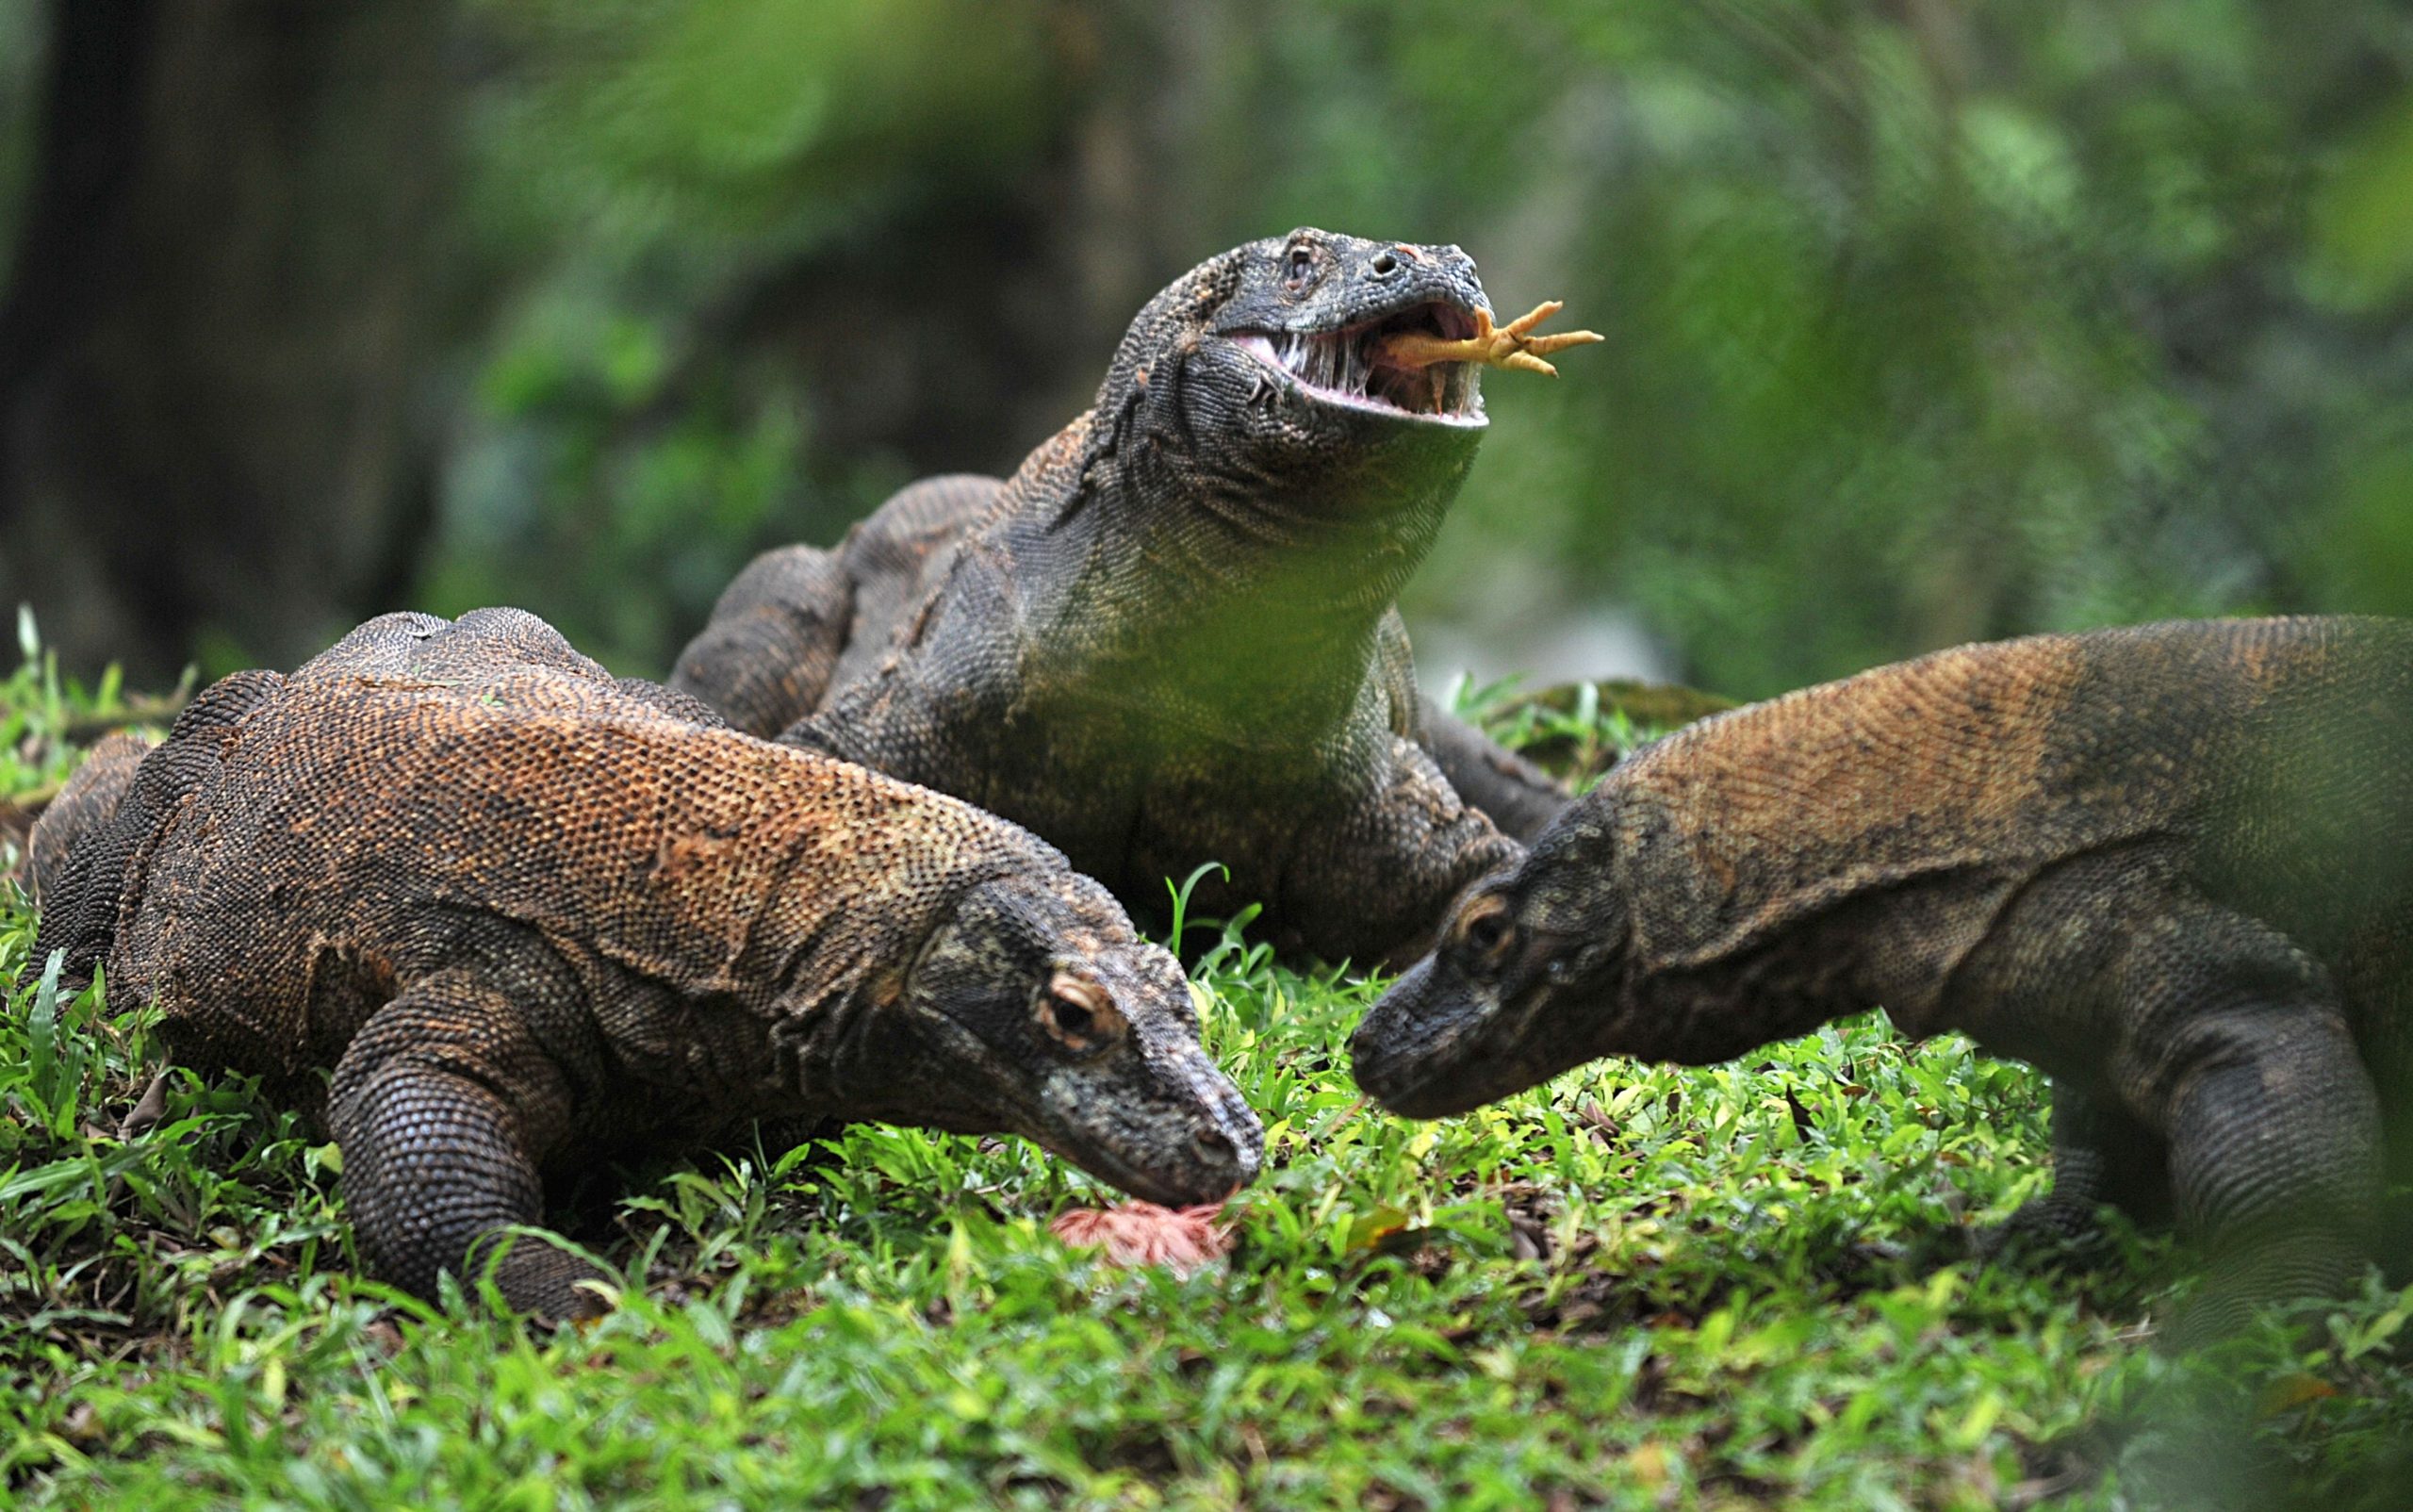 Komodo dragons chomping on chicken. (Photo: Bay ISMOYO / AFP, Getty Images)